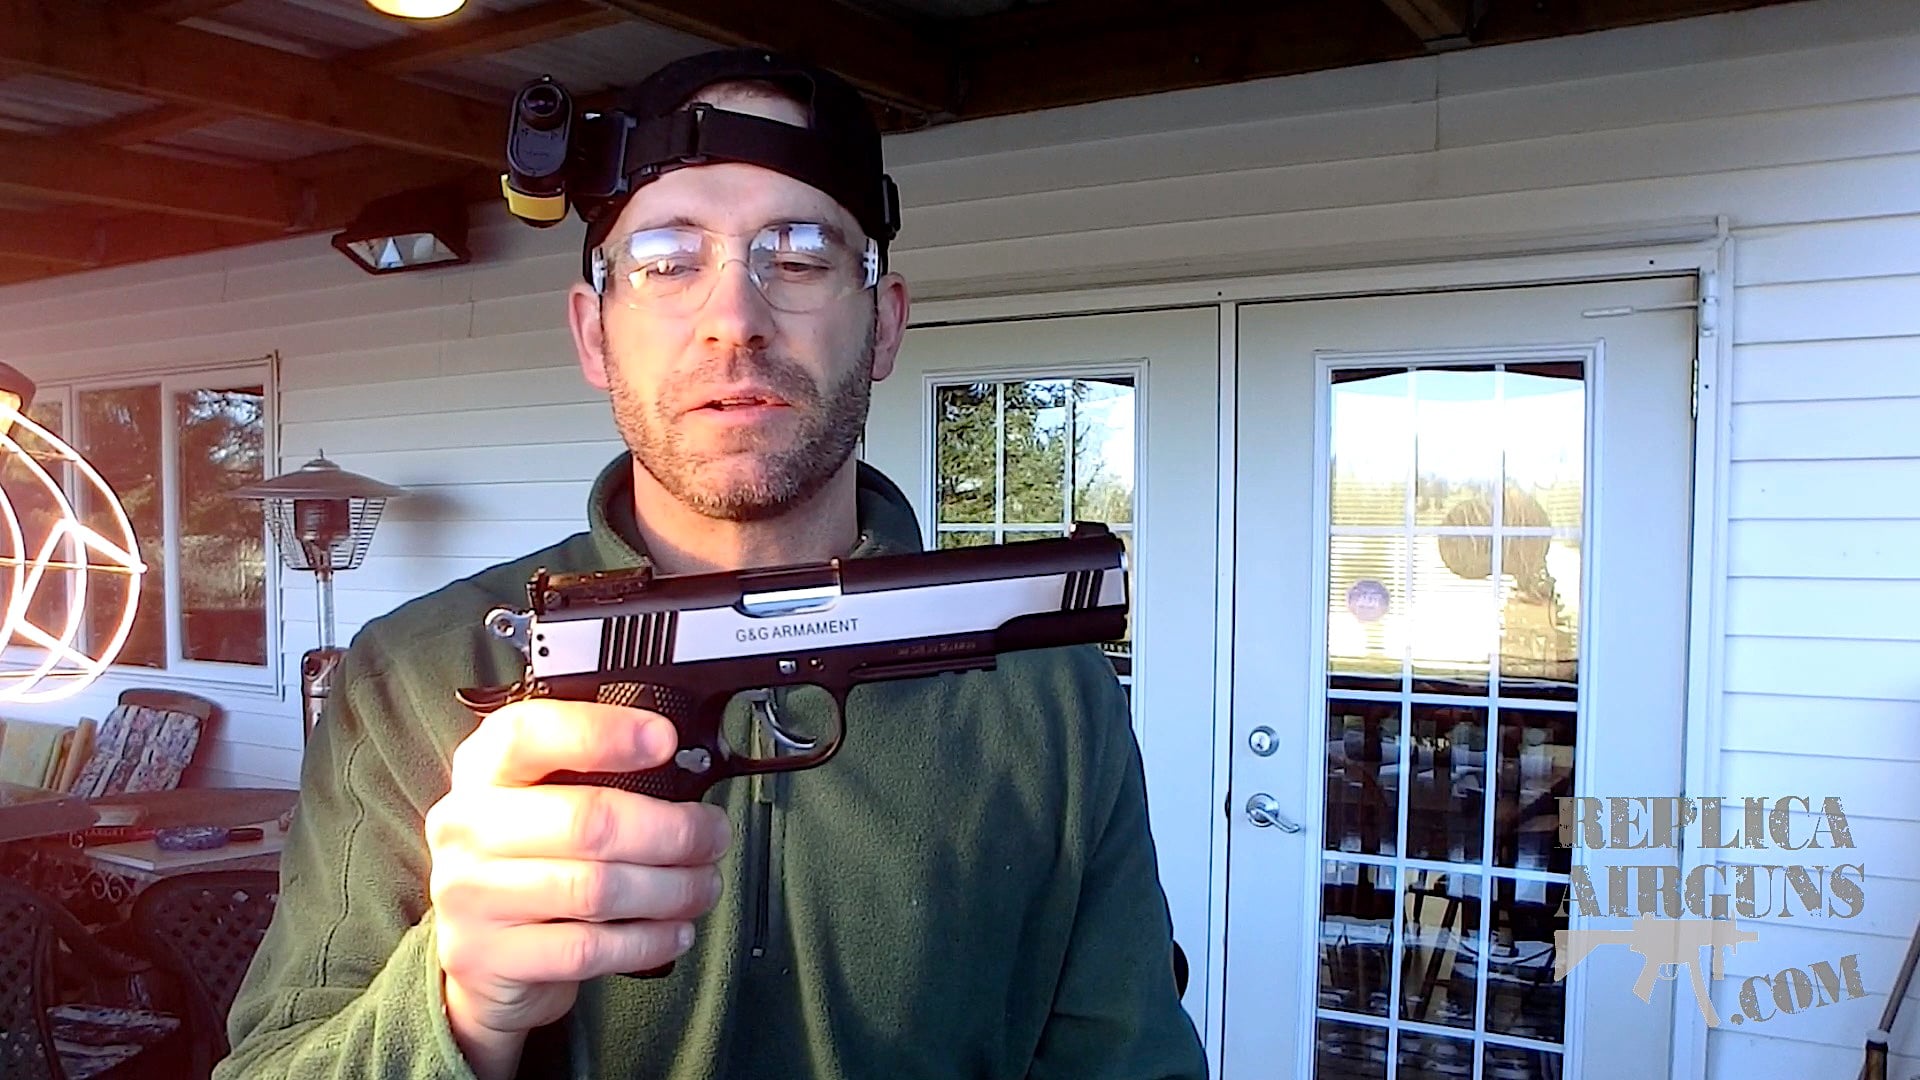 G&G Xtreme 45 CO2 Blowback Airsoft Pistol Field Test Shooting Review